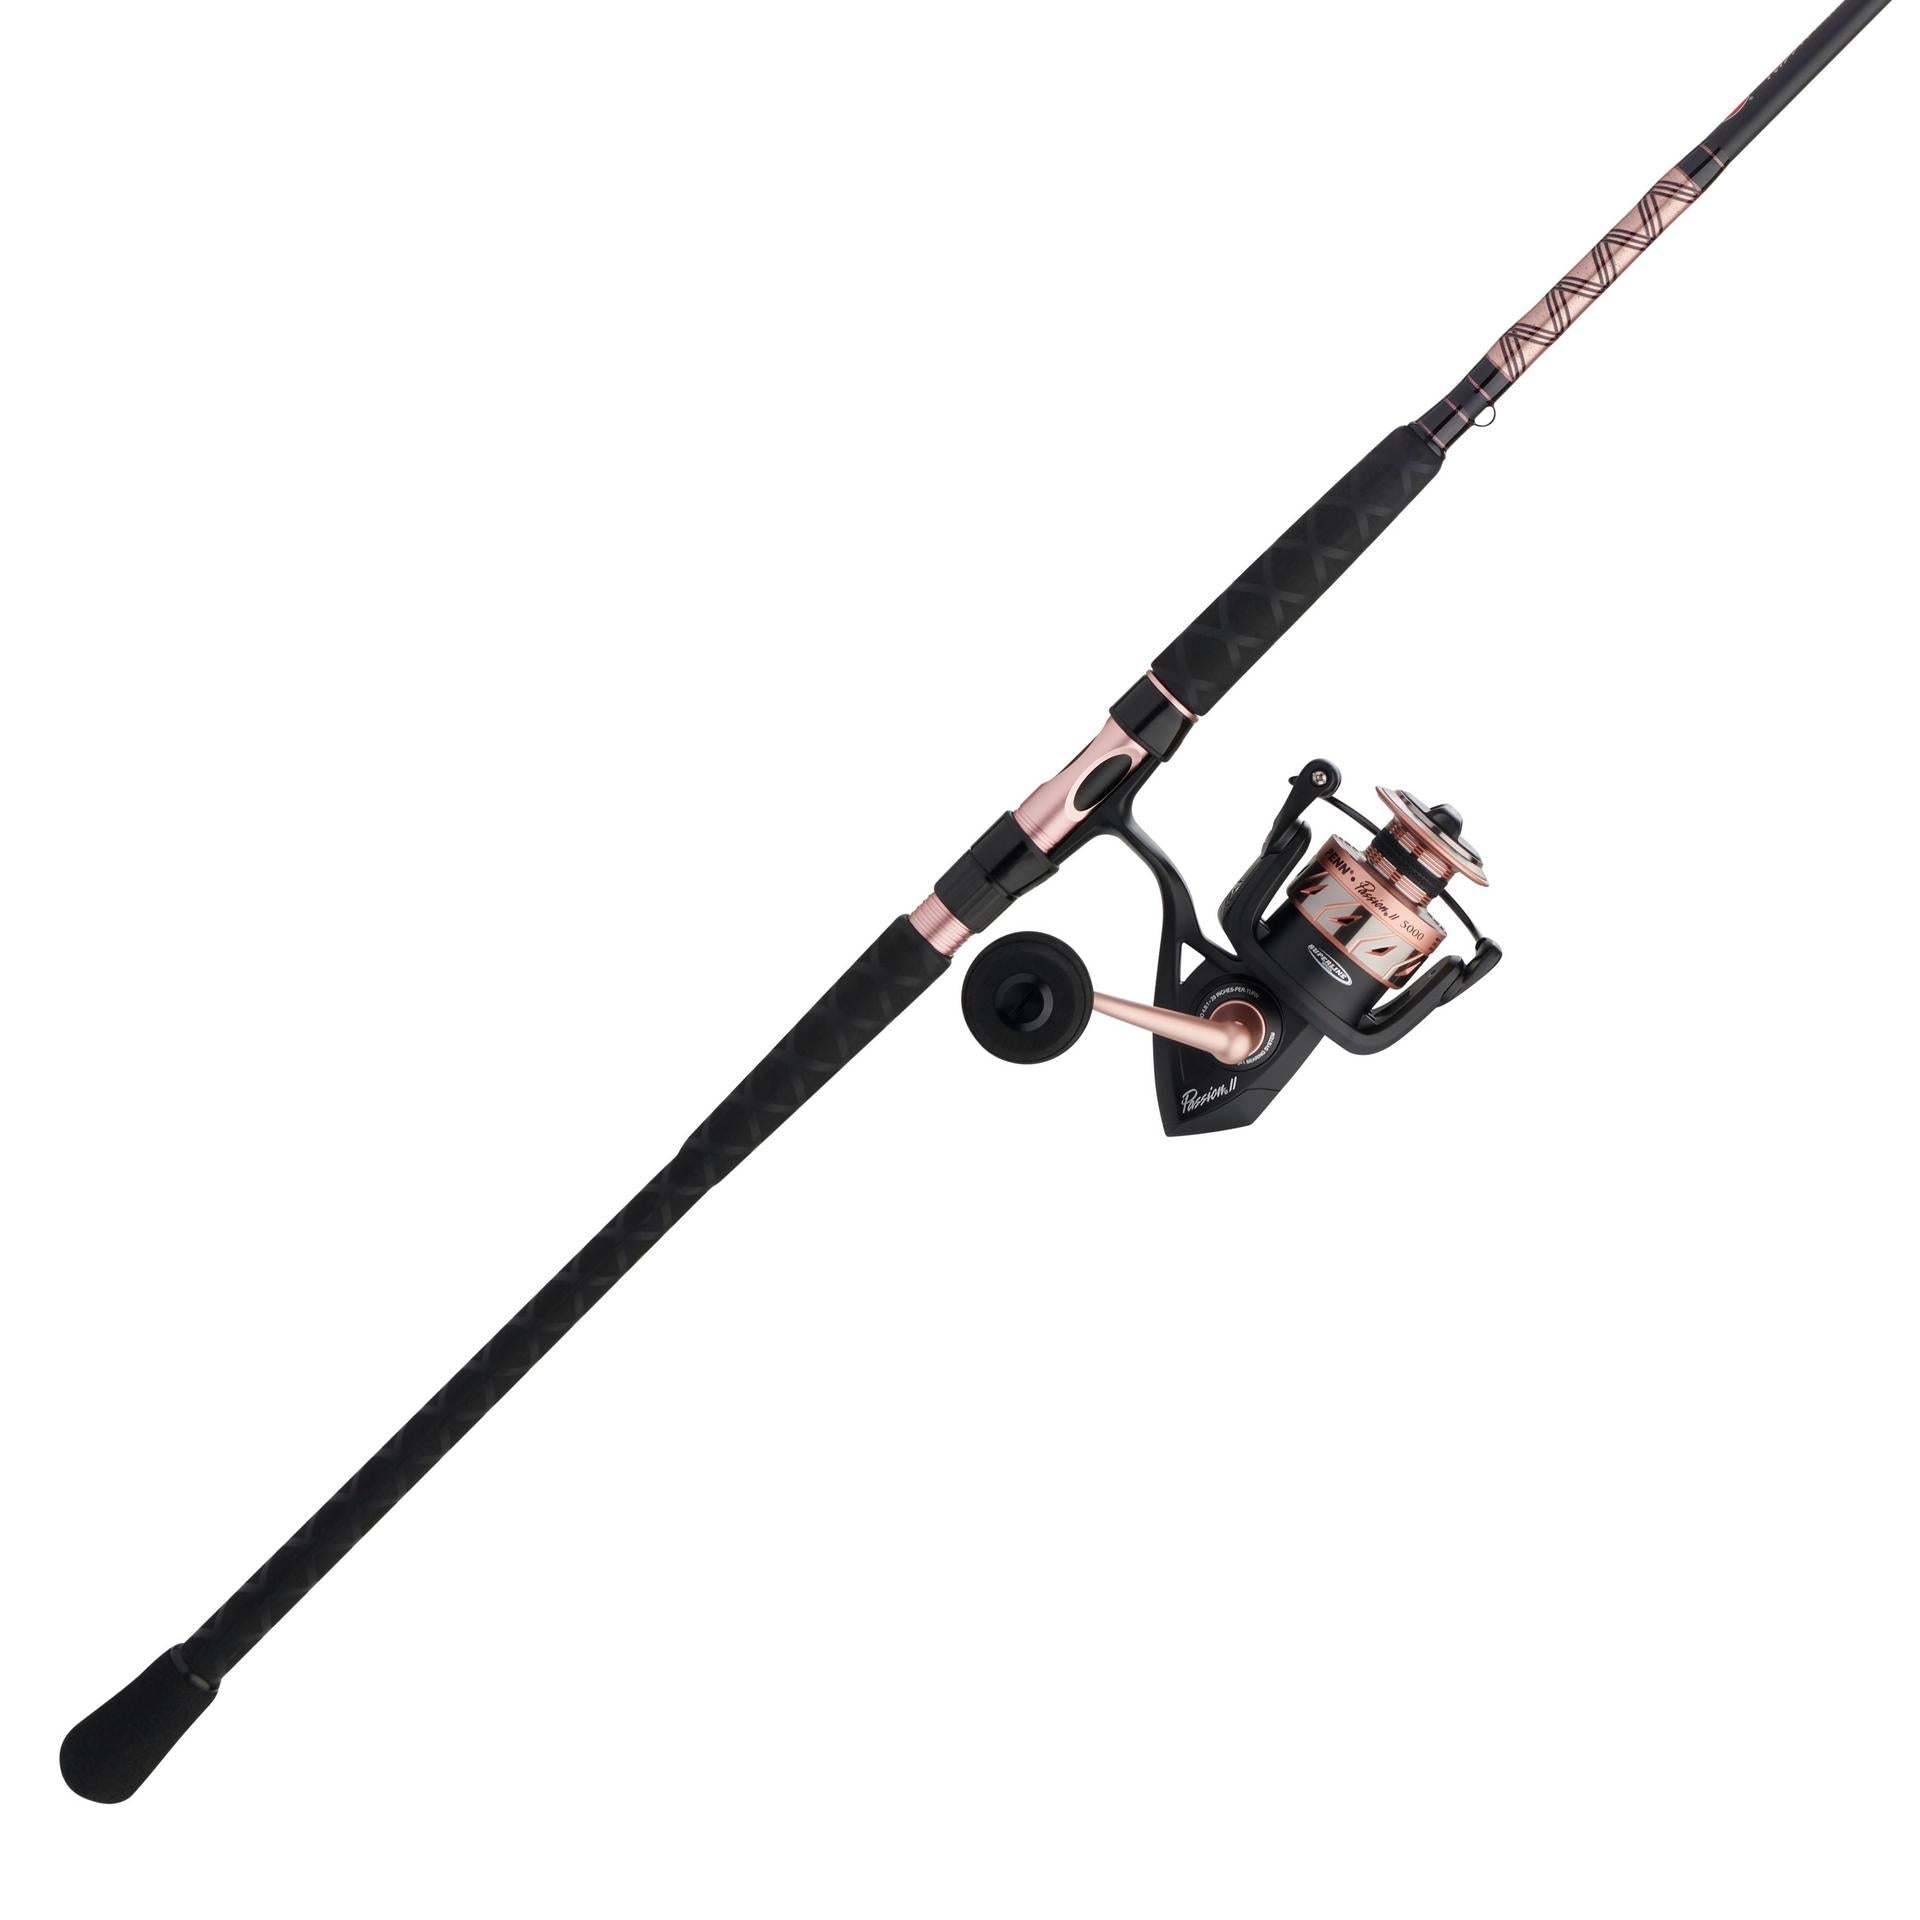  PENN 7' Pursuit IV 2-Piece Fishing Rod and Reel